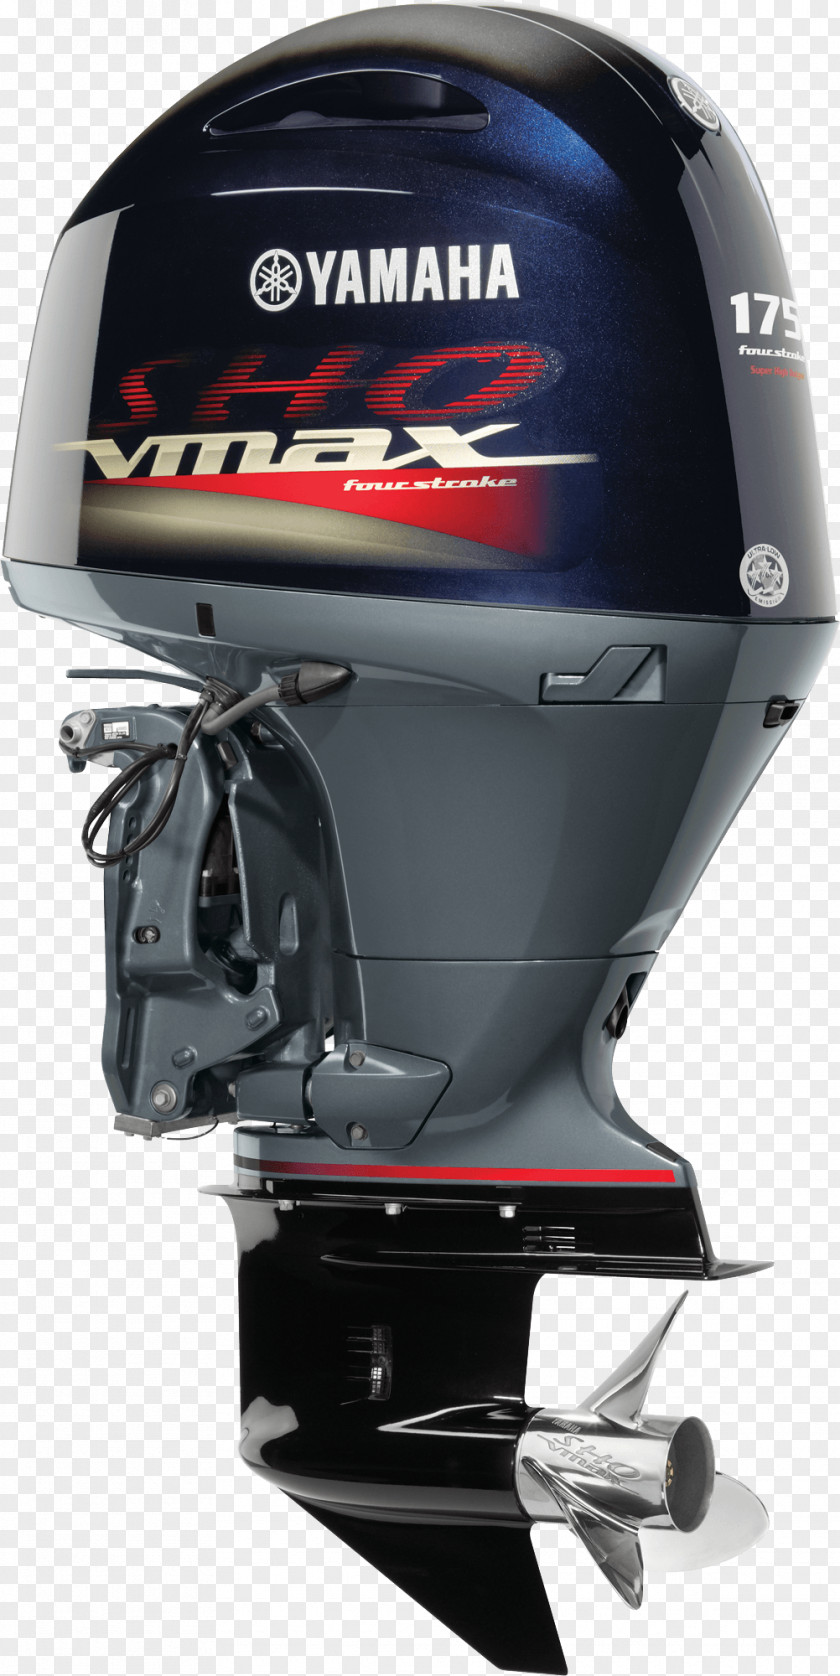 Engine Yamaha Motor Company Outboard VMAX Four-stroke PNG